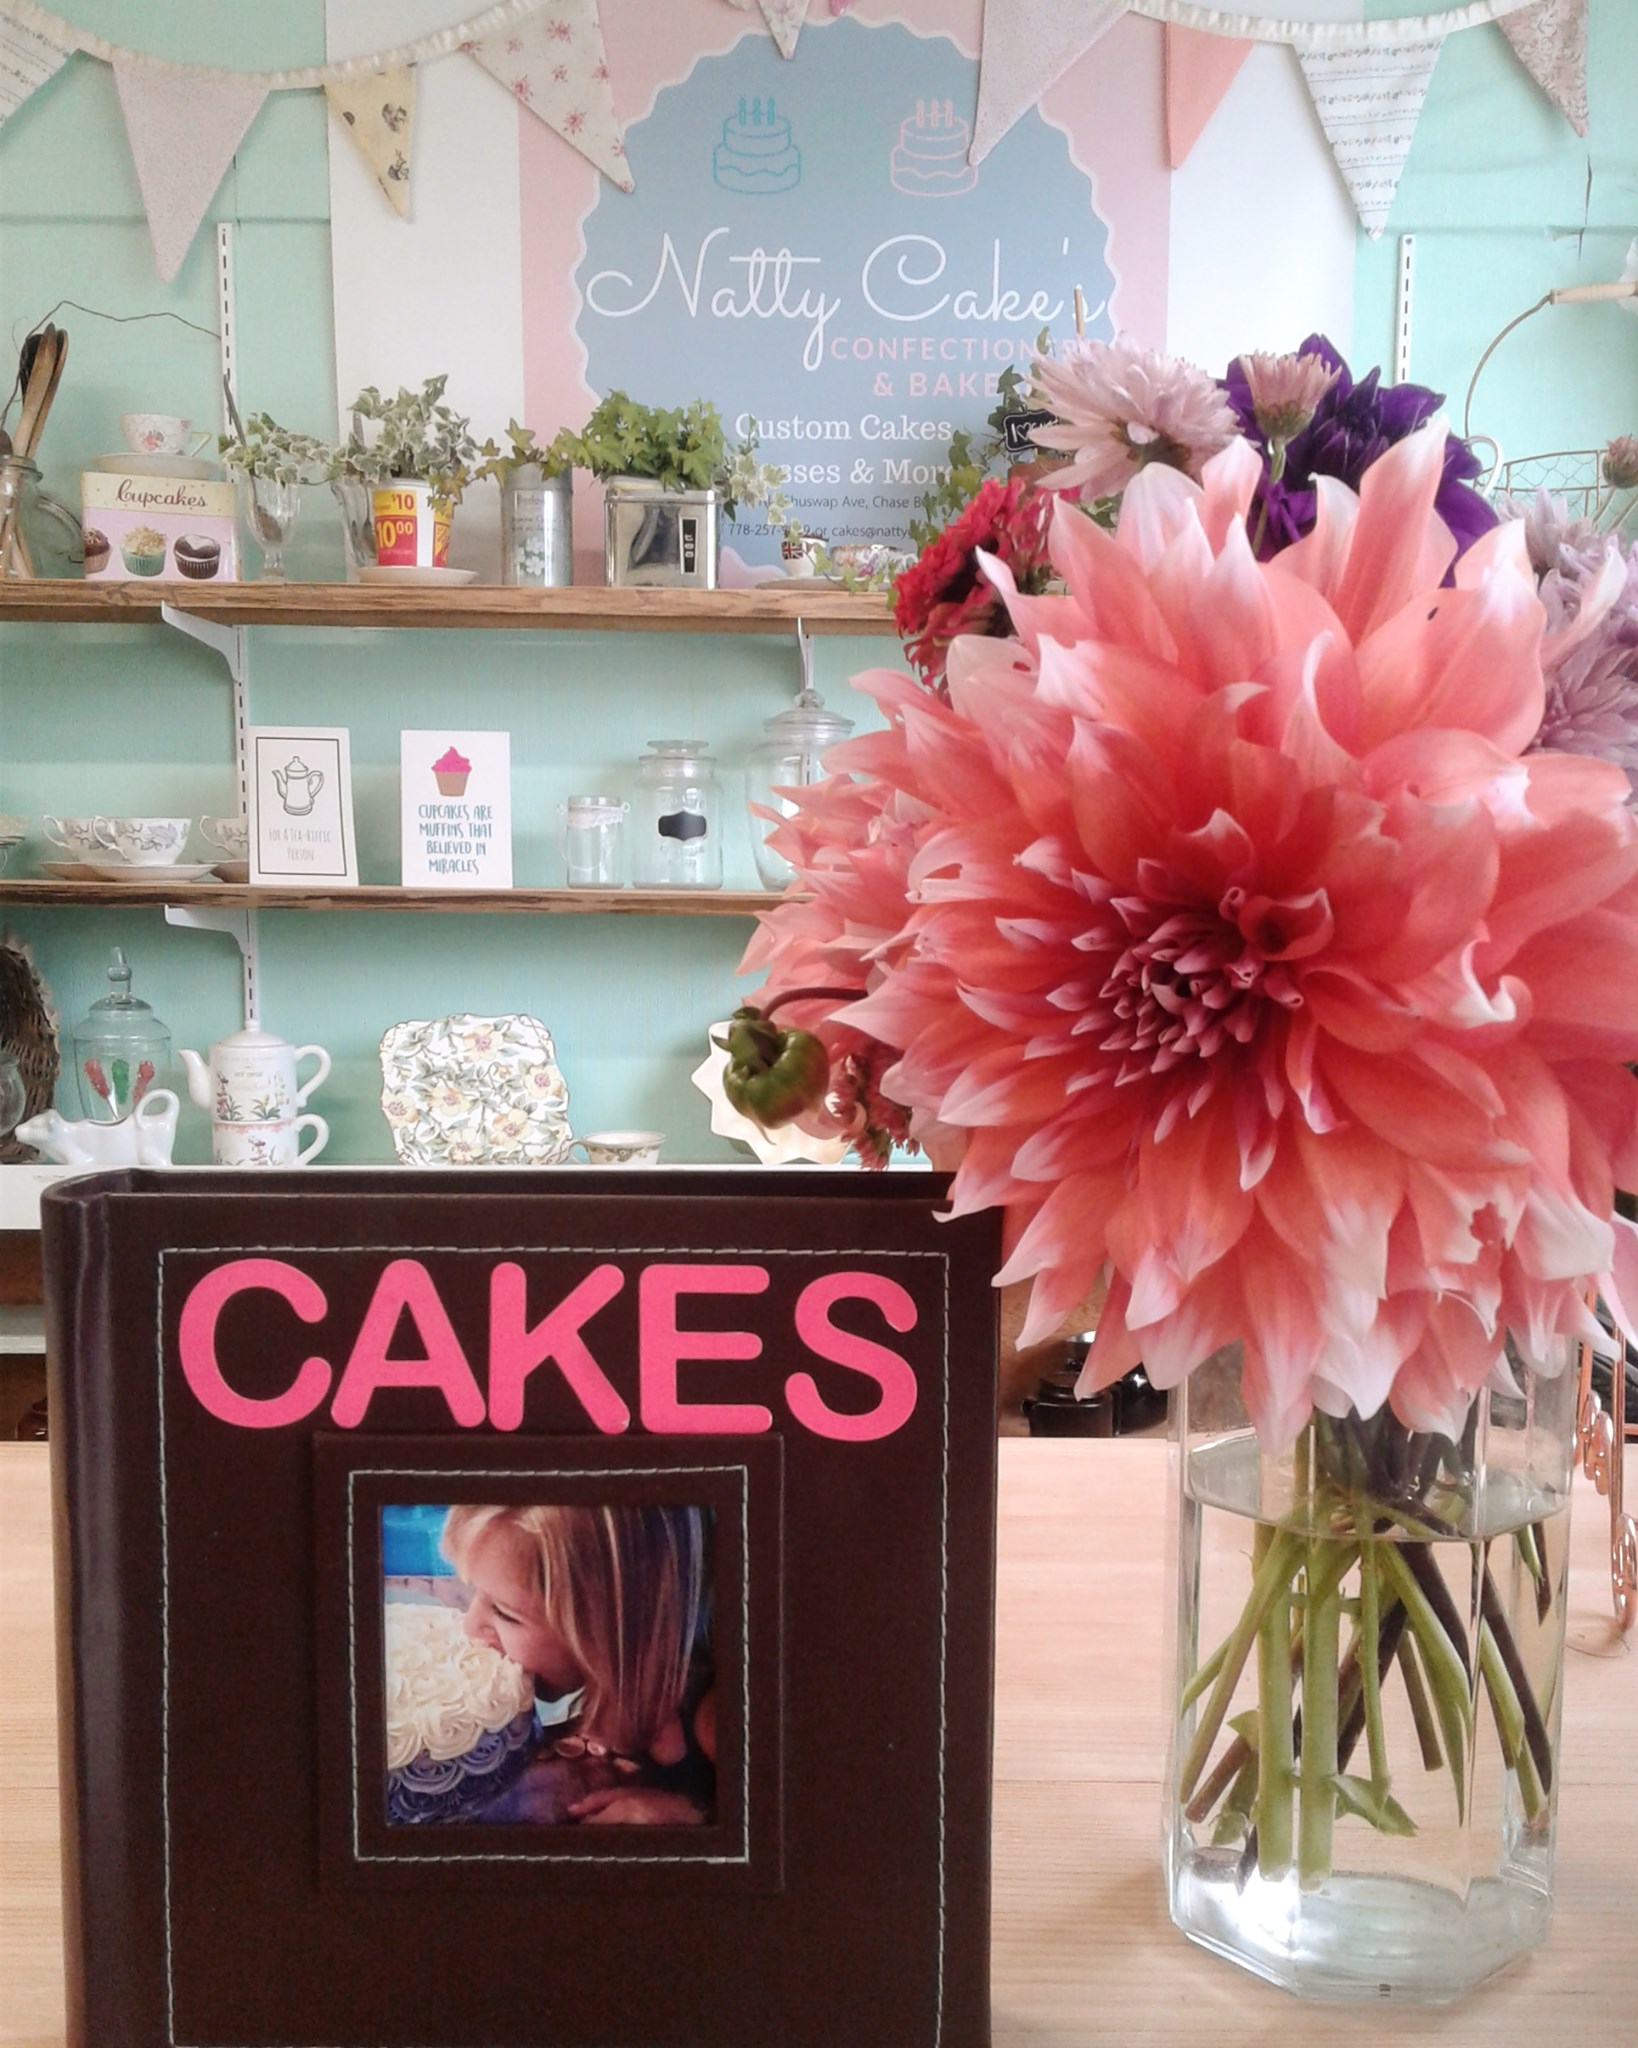 Natty Cakes: Natty Cakes Confectionery & Bakeshop creates custom cakes and sweet treats in Chase. We also serve up savory delights, fresh soups, and scrumptious lunch specials daily.